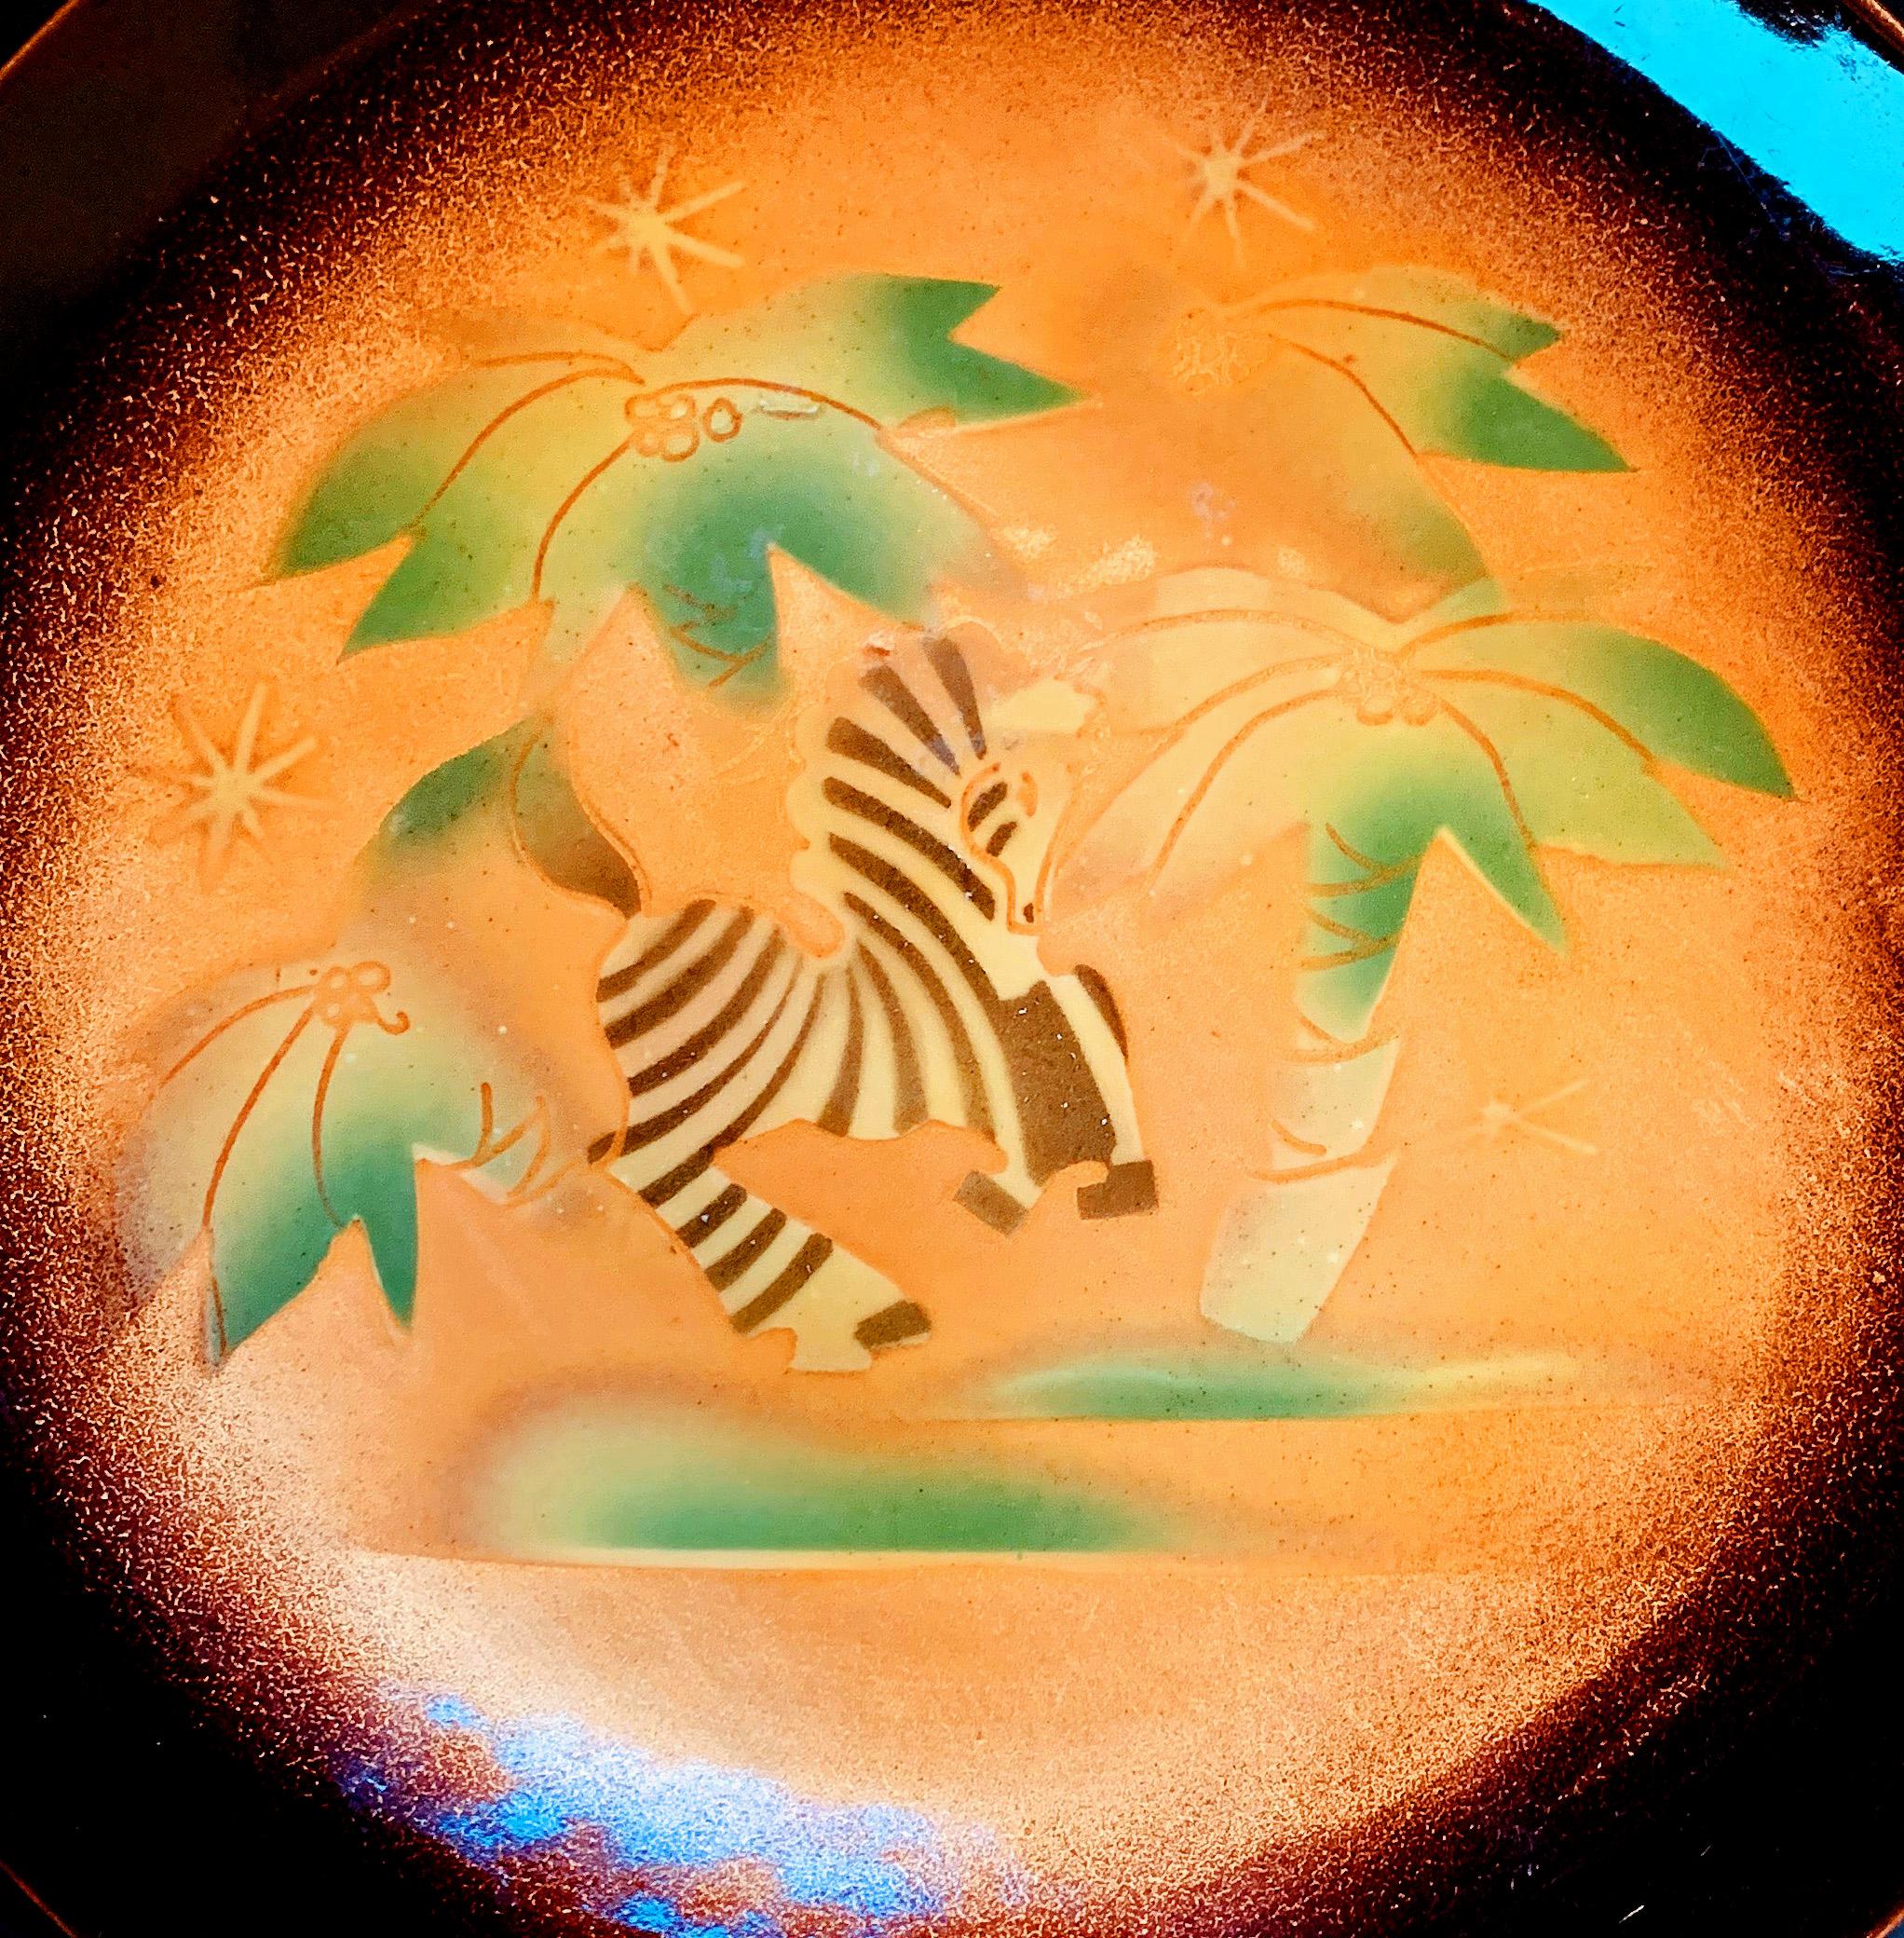 Suffused with brilliant tangerine and jade tones and featuring an exuberant, Art Deco zebra cavorting amidst a group of coconut palms, this brilliant example of American enamel artistry was created by Edward Winter, one of the nation's pioneering